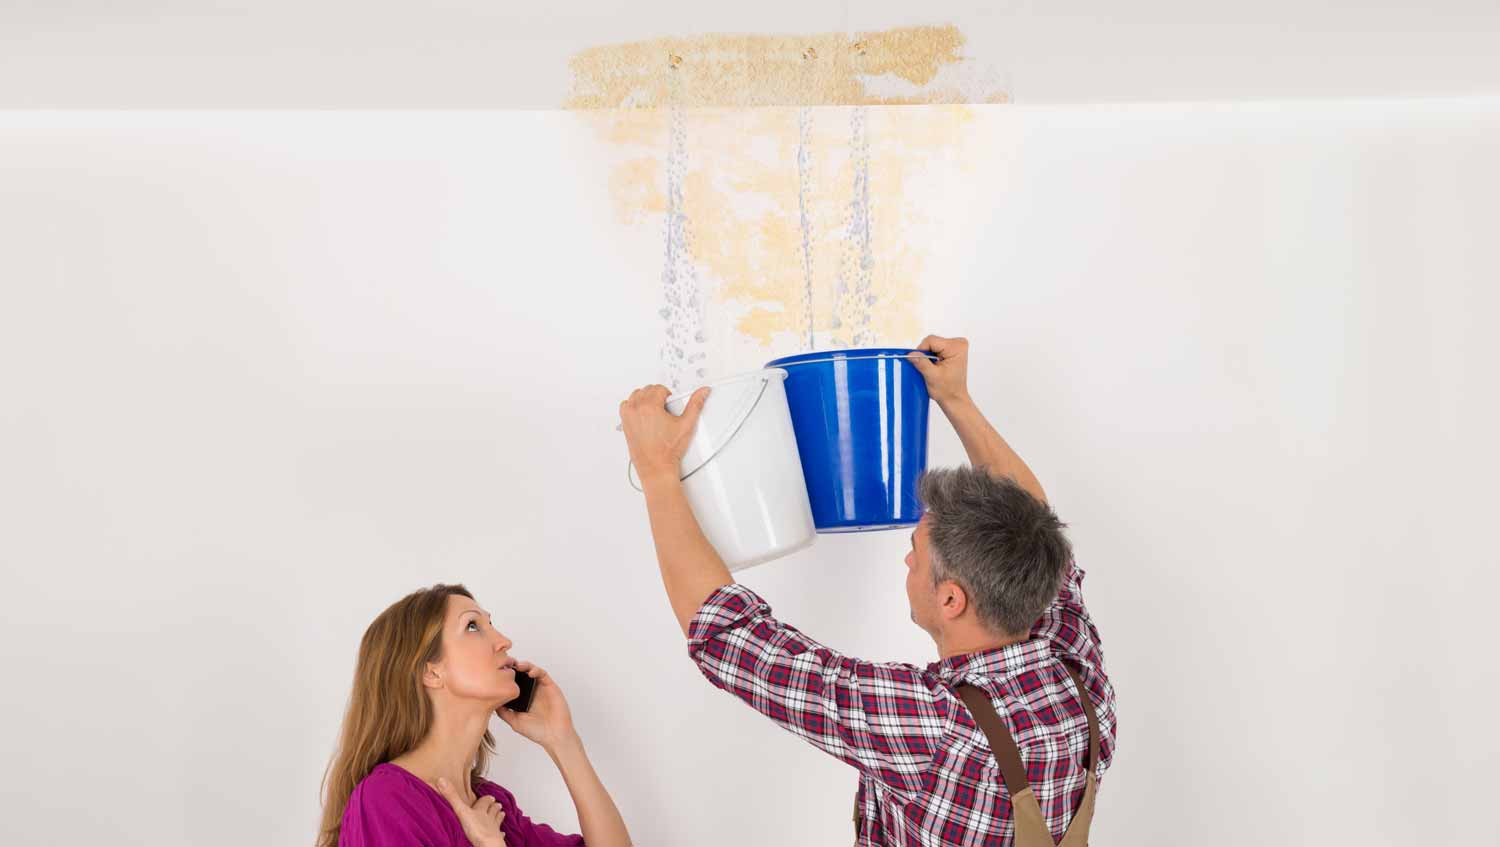 roof water damage repair Wake Forest NC ceiling leak cleanup ceiling leak repair ceiling leak restoration